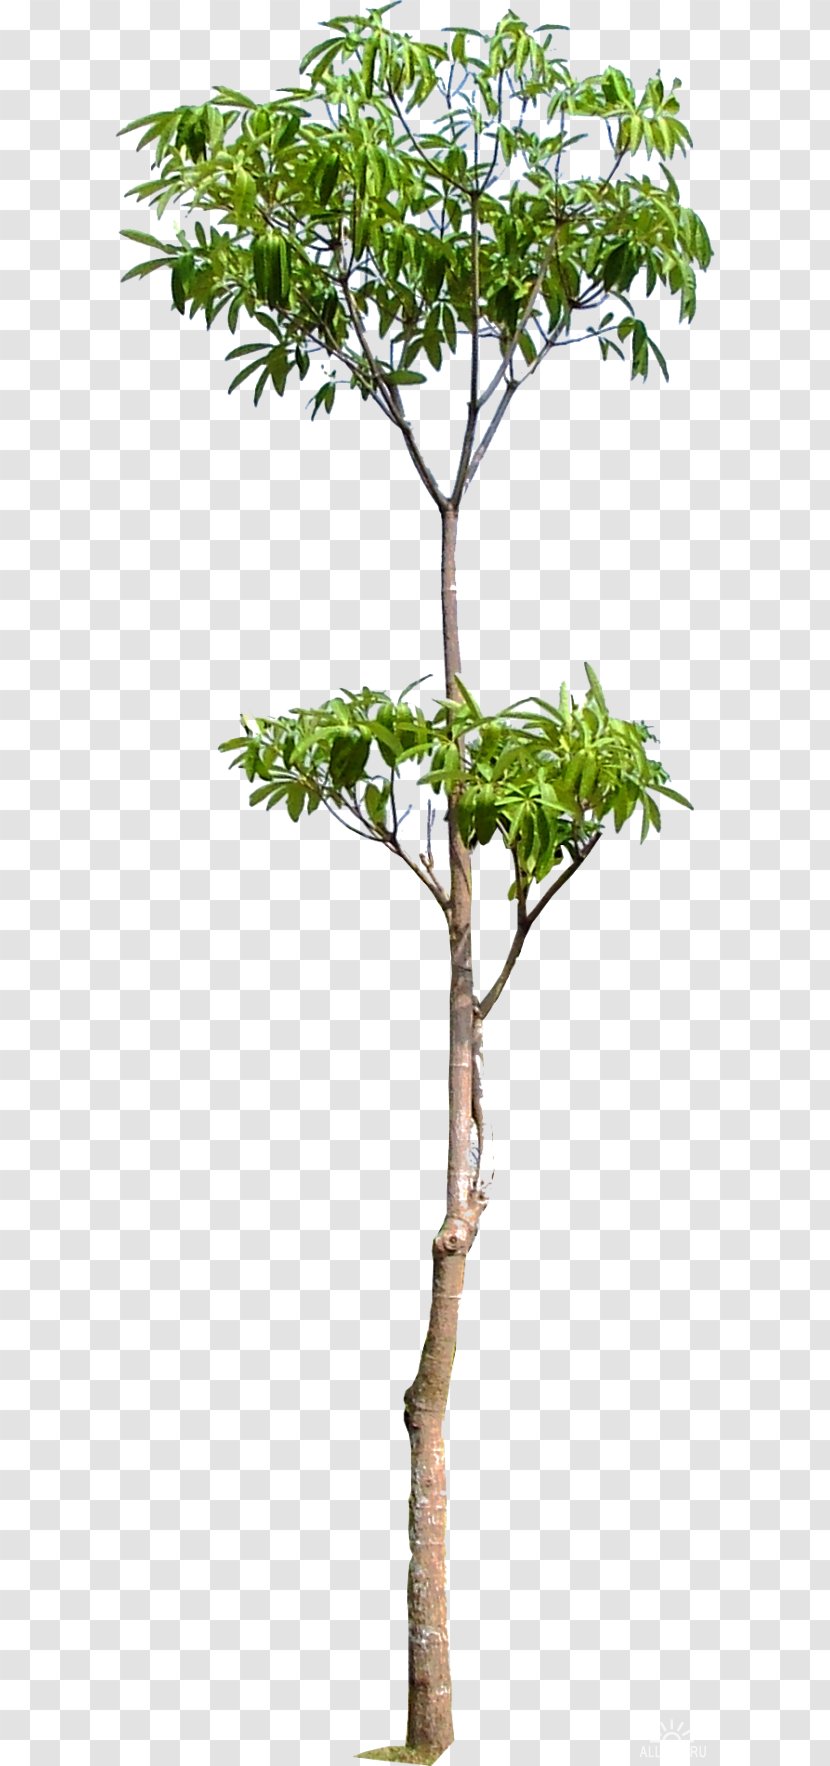 Tree Woody Plant Trunk Branch - Flowerpot Transparent PNG